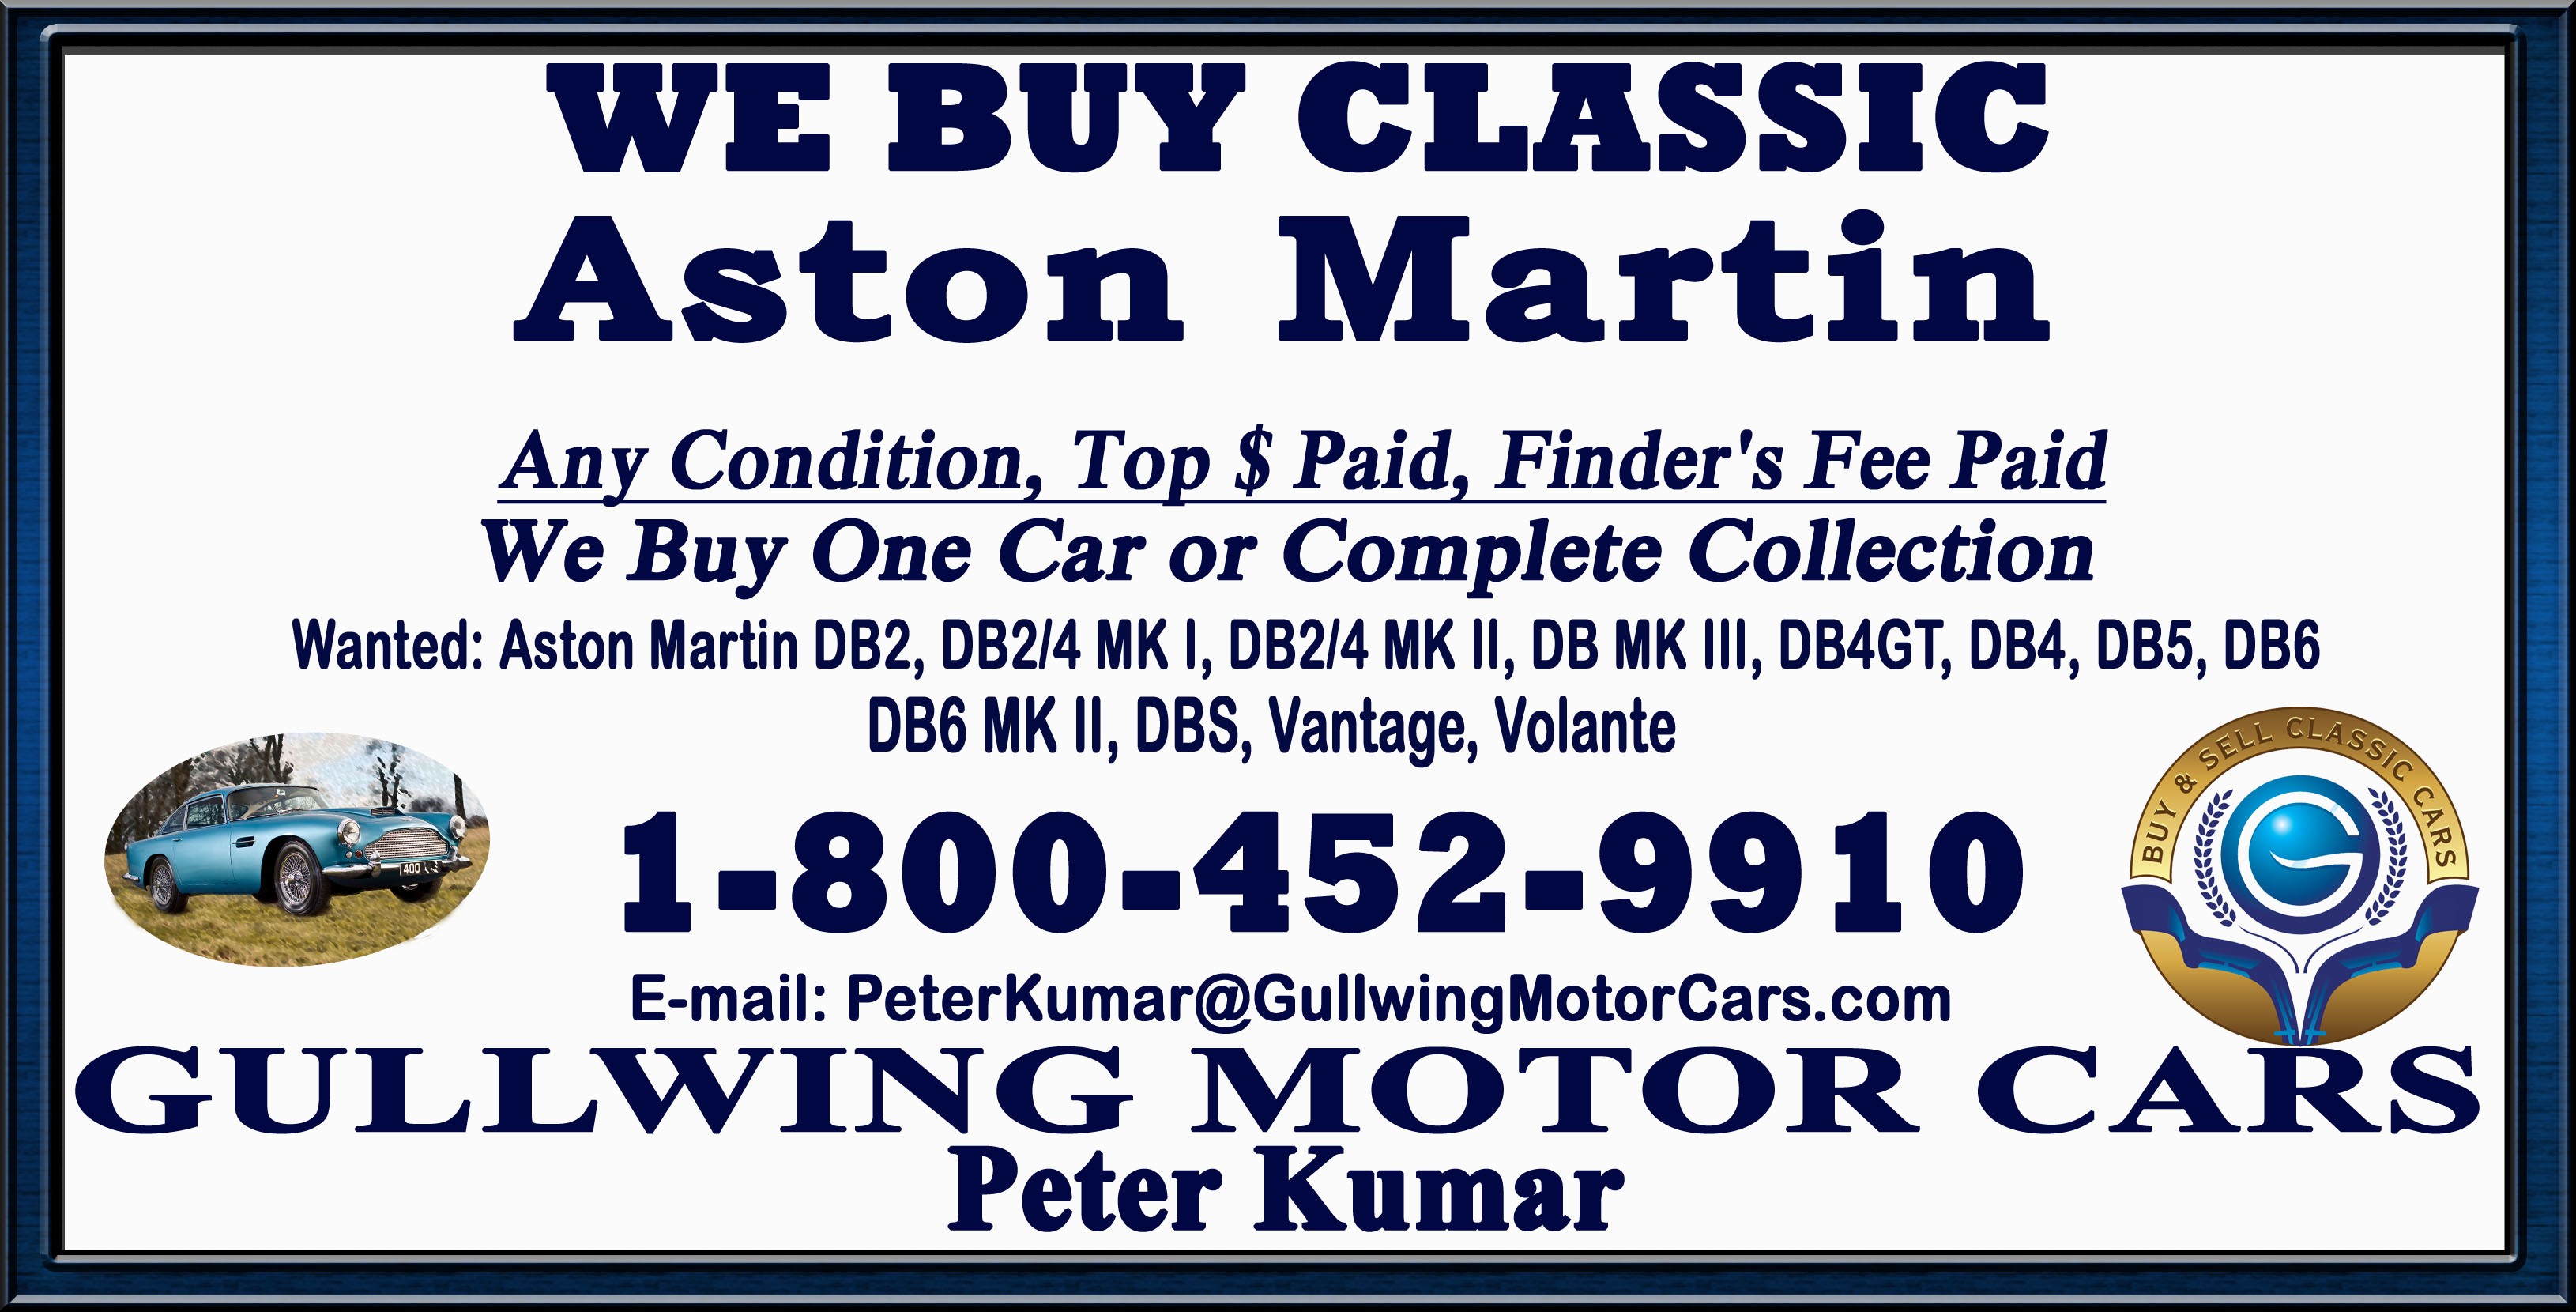 Sell Classic Aston Martin | Call Gullwing Motor Cars | Vintage BMW For Sale